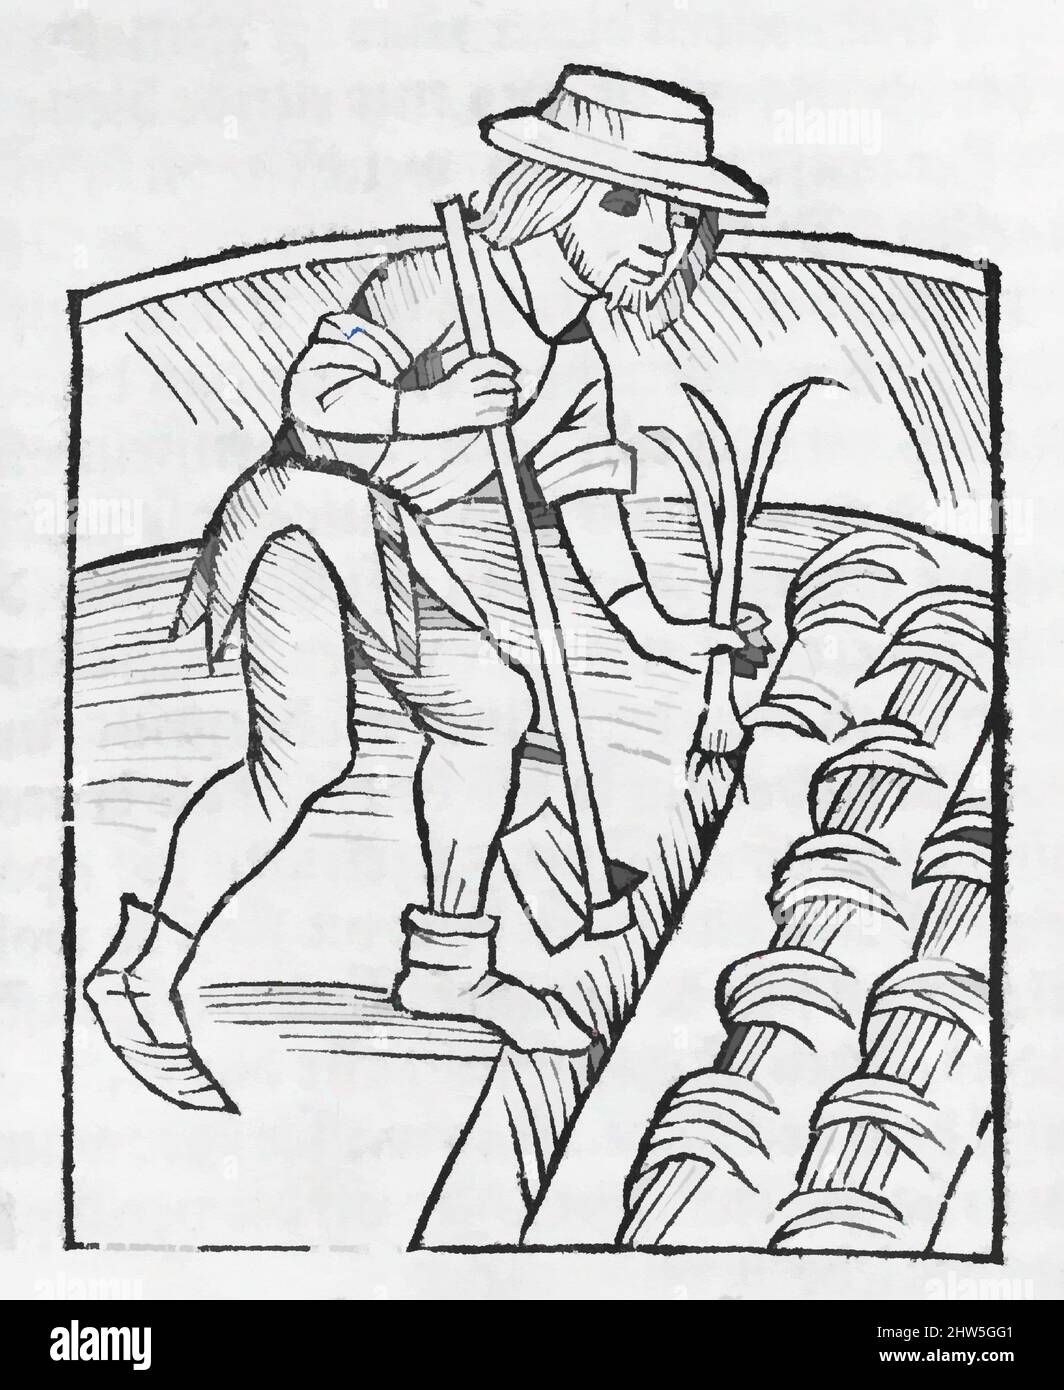 Art inspired by II) Der Ritter vom Turm, von den exenplen der Gotzfurcht und erberkeit., 1499, 1512, 1513, Woodcuts, Overall: 11 15/16 x 8 1/4 x 2 15/16 in. (30.3 x 21 x 7.5 cm), Books, Albrecht Dürer (German, Nuremberg 1471–1528 Nuremberg) II), Urs Graf (Swiss, Solothurn ca. 1485–1529, Classic works modernized by Artotop with a splash of modernity. Shapes, color and value, eye-catching visual impact on art. Emotions through freedom of artworks in a contemporary way. A timeless message pursuing a wildly creative new direction. Artists turning to the digital medium and creating the Artotop NFT Stock Photo